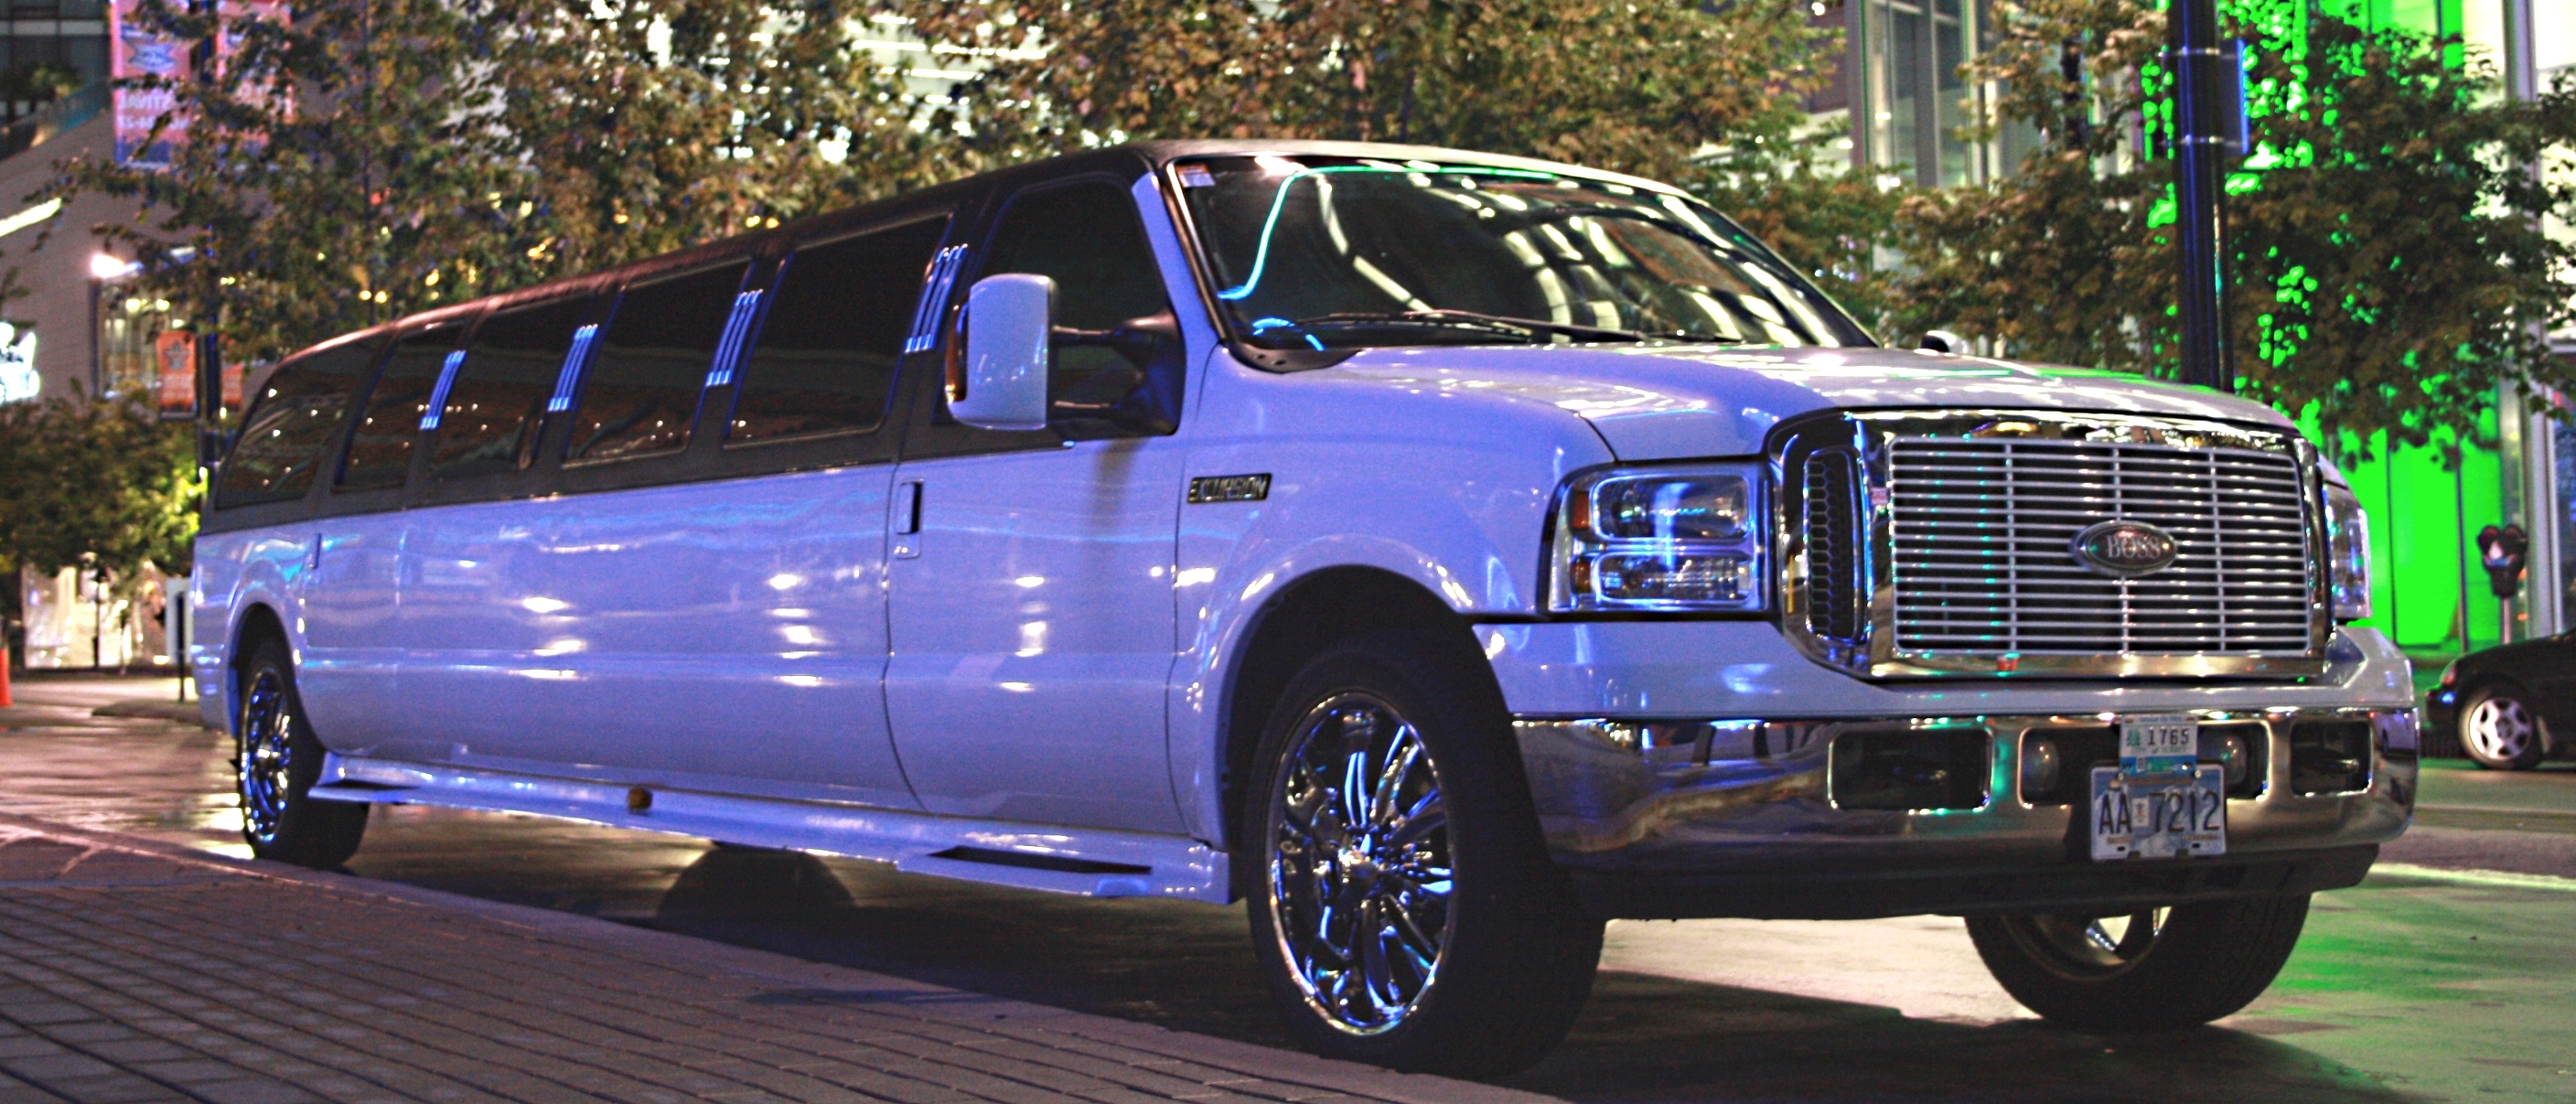 ᑕ❶ᑐ Different Types Of Limousines How To Choose The, 46% OFF